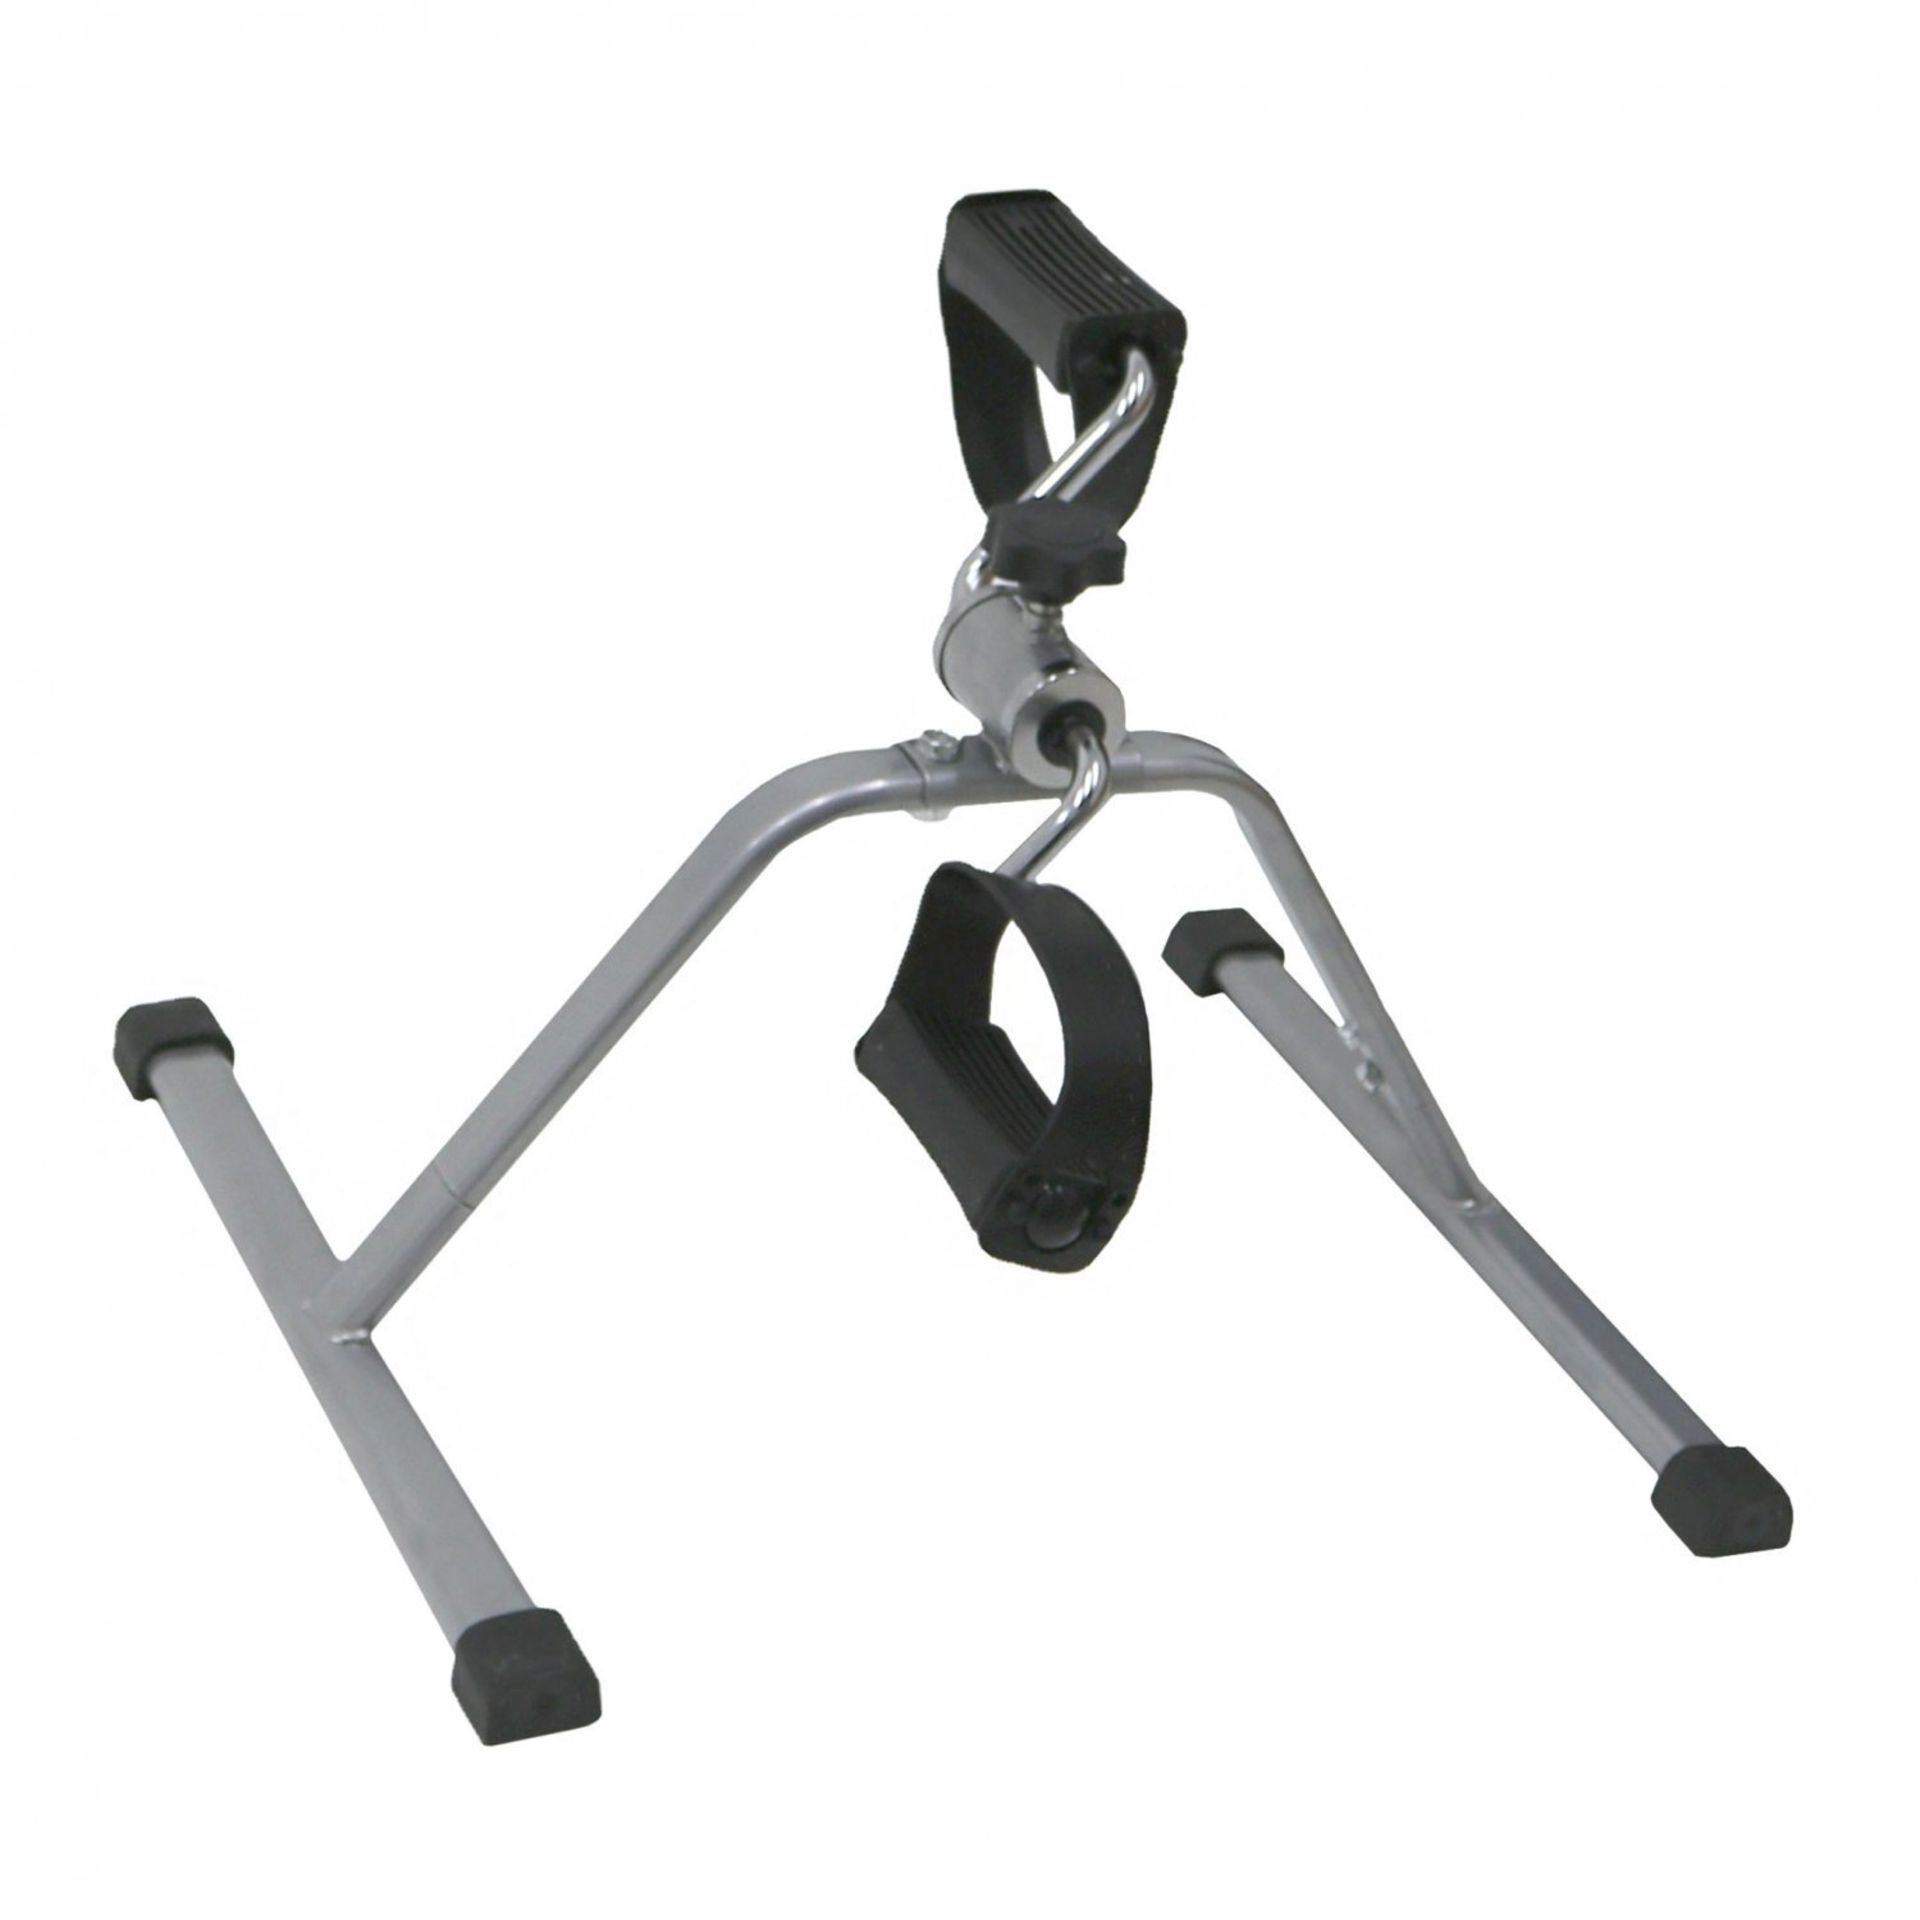 (EE543) Amazing Sofa Exercise Bike / Arm Chair Leg Exerciser Use On the Floor to Workout Leg M...